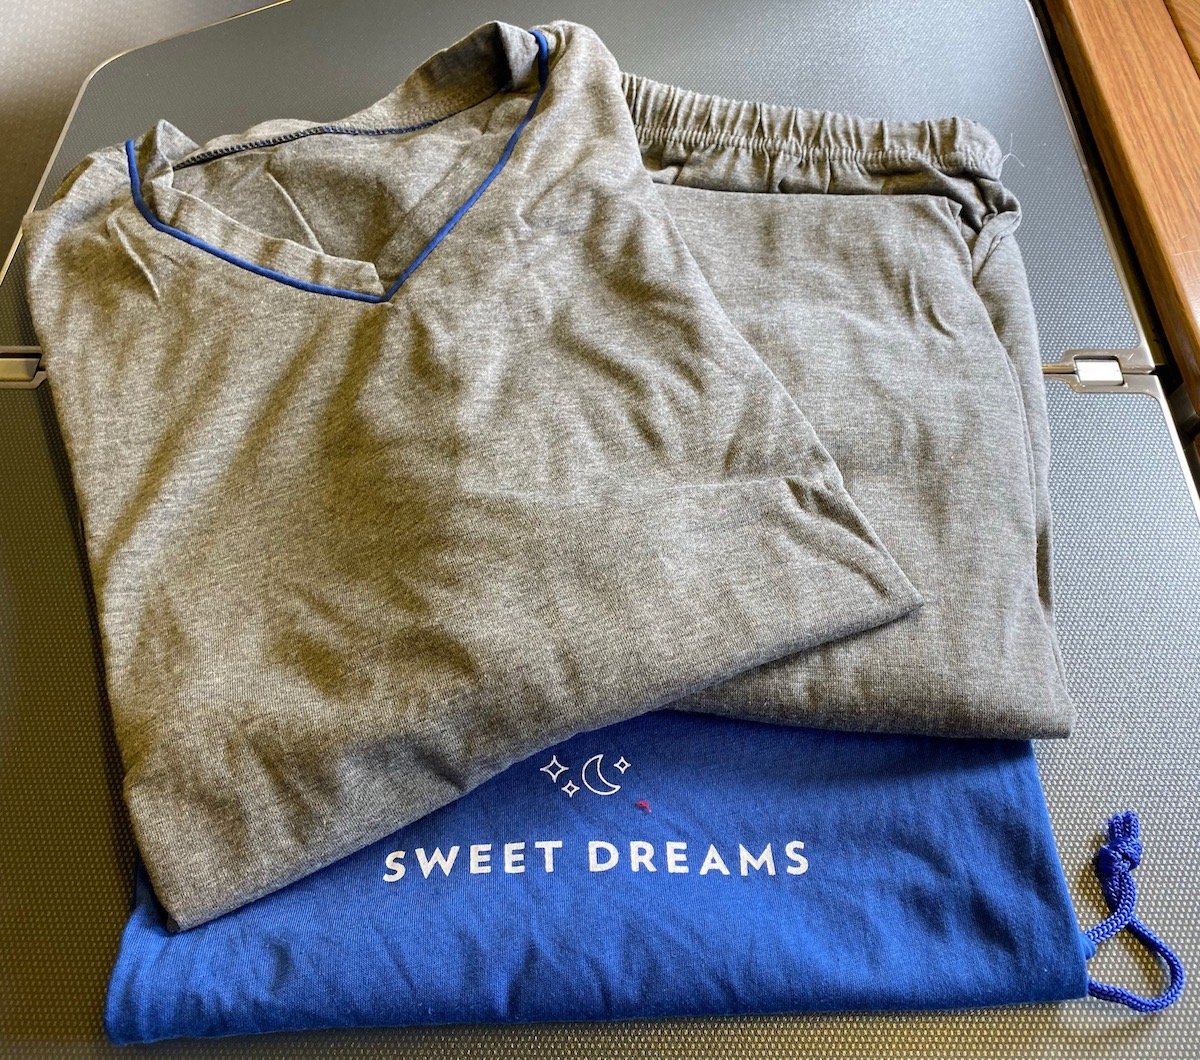 American Airlines Introduces Sustainable Pajamas